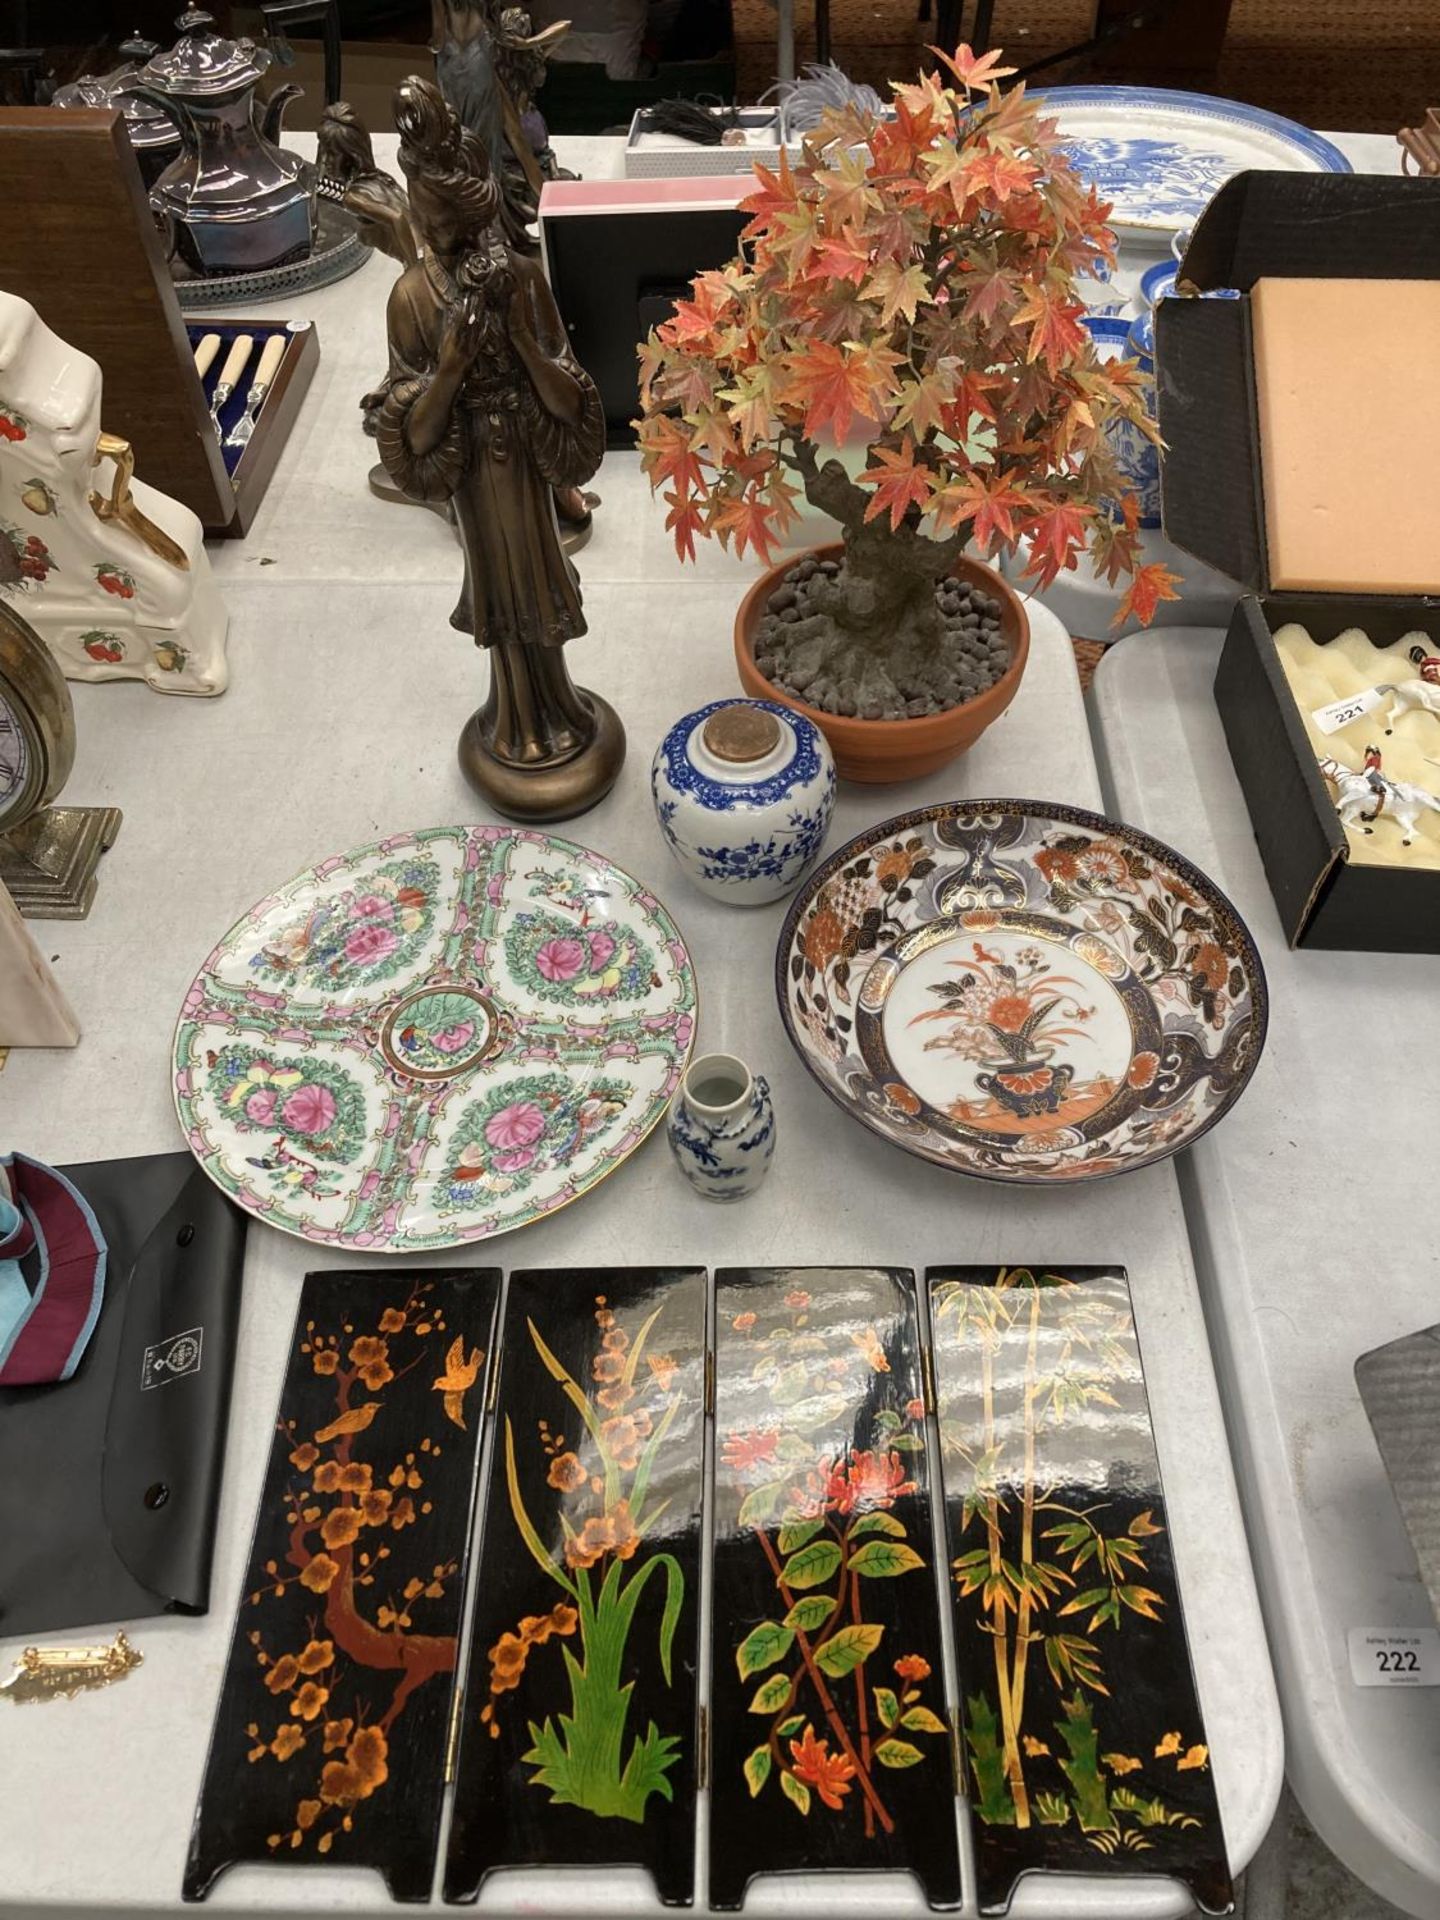 AN ORIENTAL STYLE LOT TO INCLUDE A FIGURINE, A SMALL SCREEN, BOWL, PLATE, POTS AND A MODEL OF A